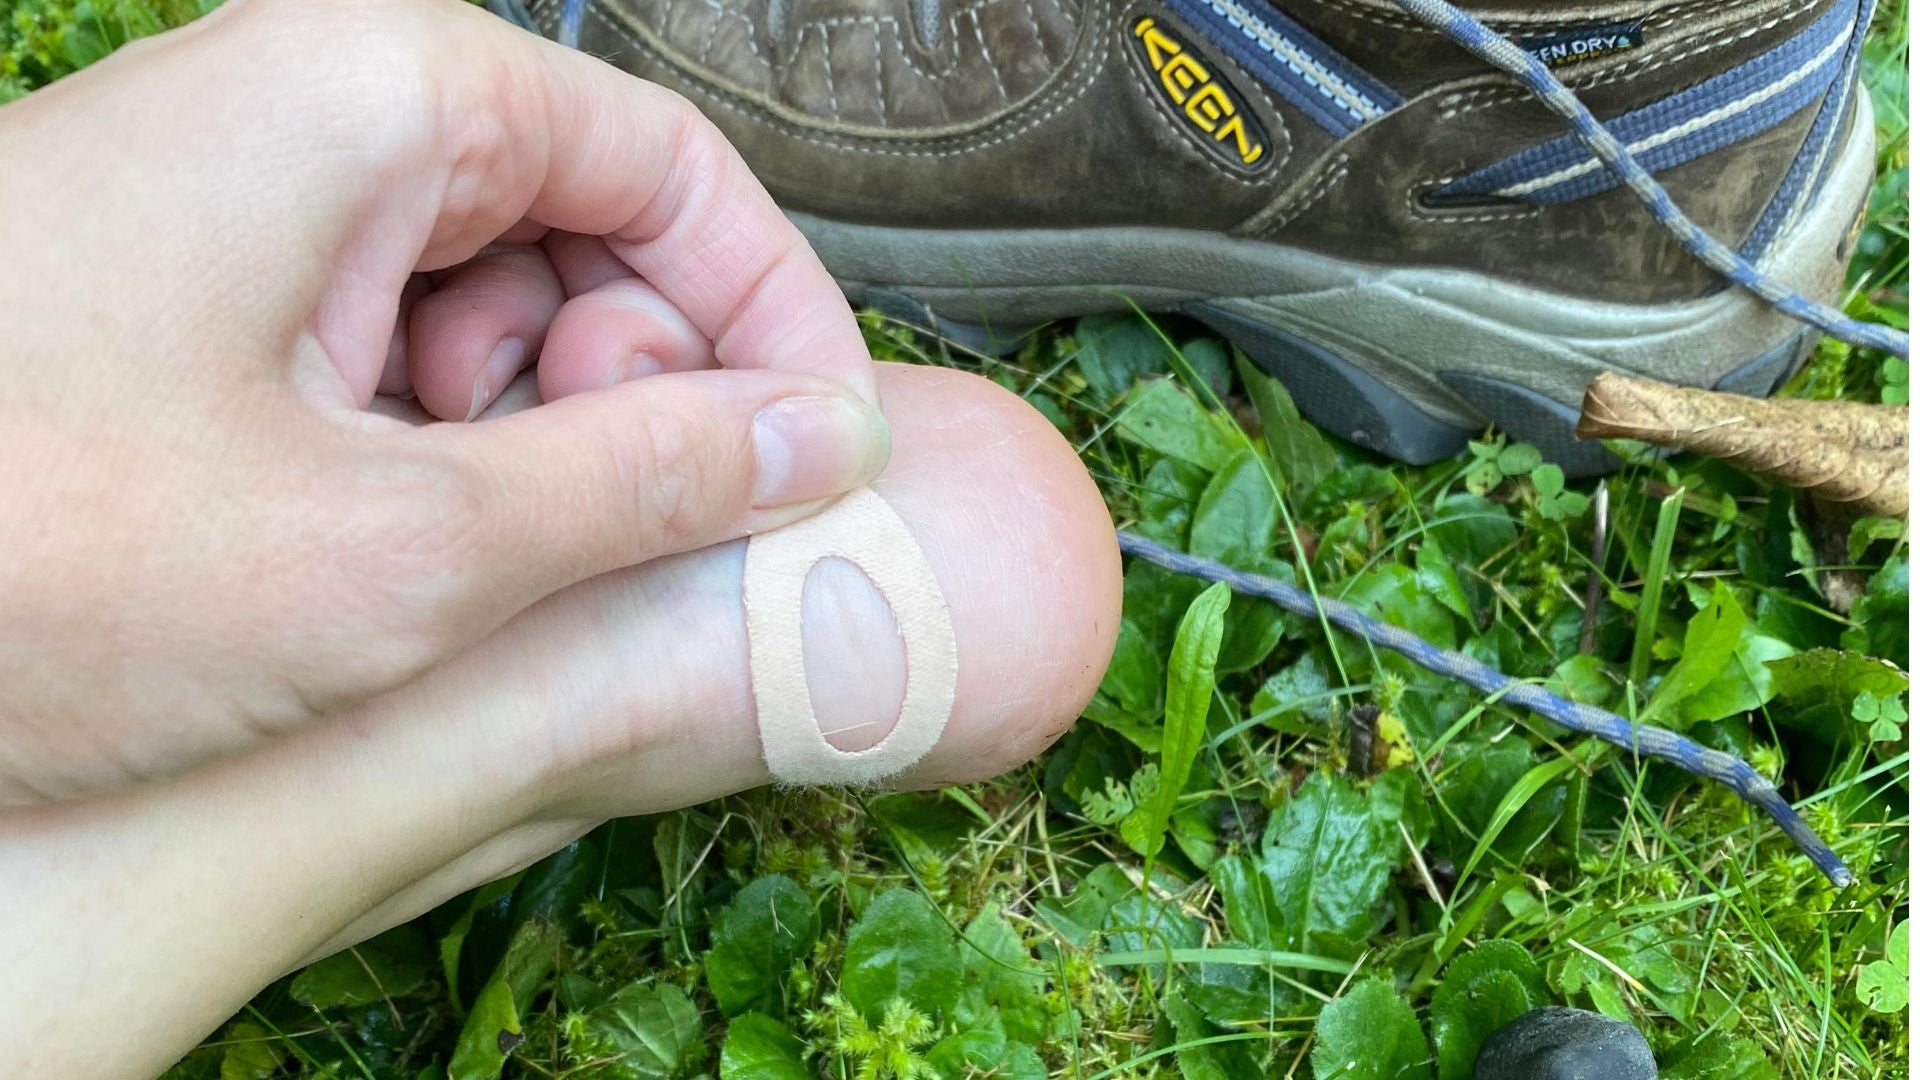 How to Prevent & Treat Blisters While Hiking